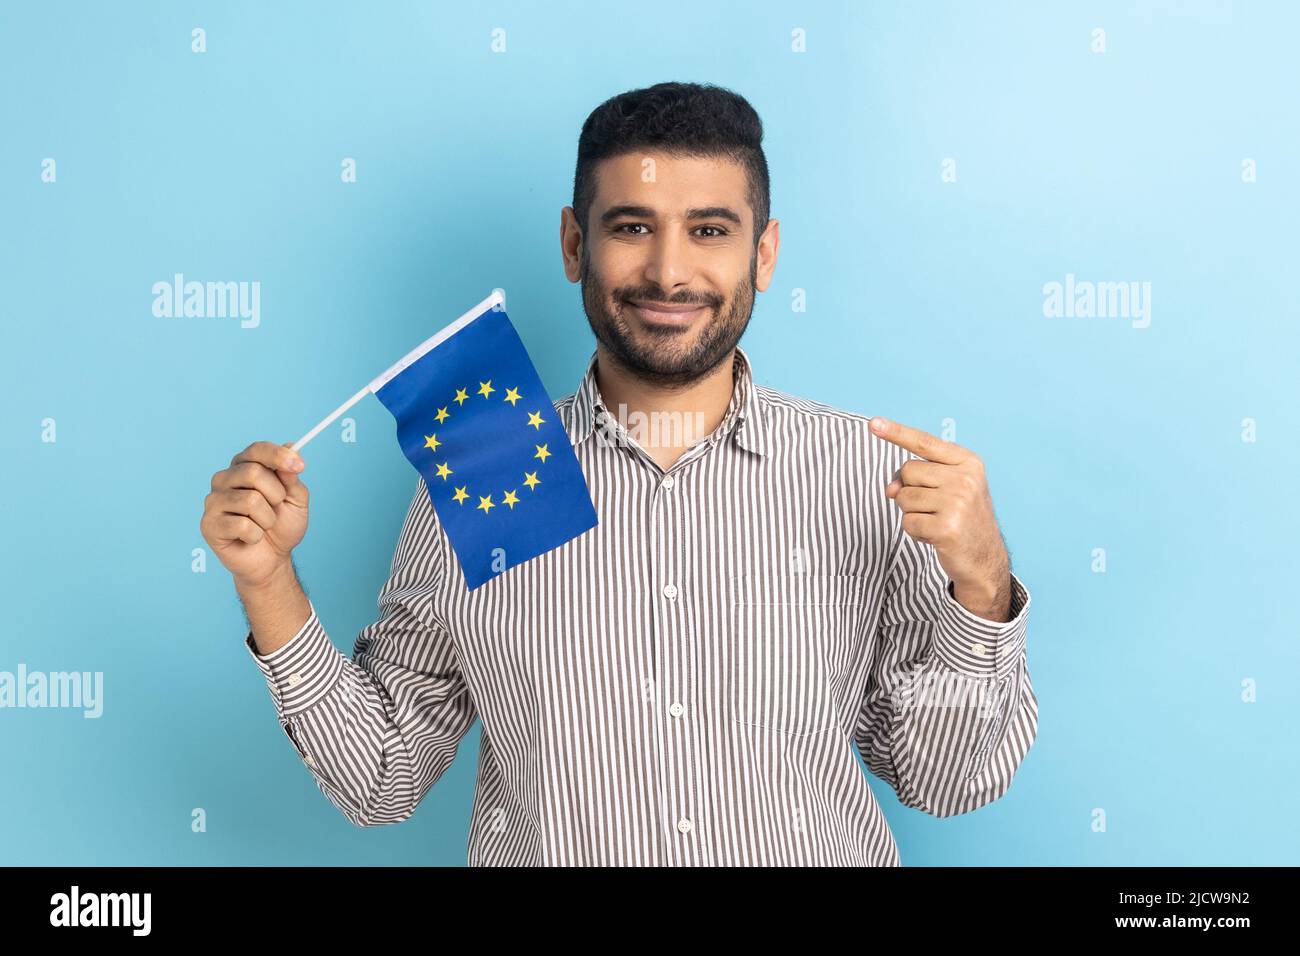 Bearded businessman smiling broadly and pointing flag of European Union, symbol of Europe, EU association and community, wearing striped shirt. Indoor studio shot isolated on blue background. Stock Photo